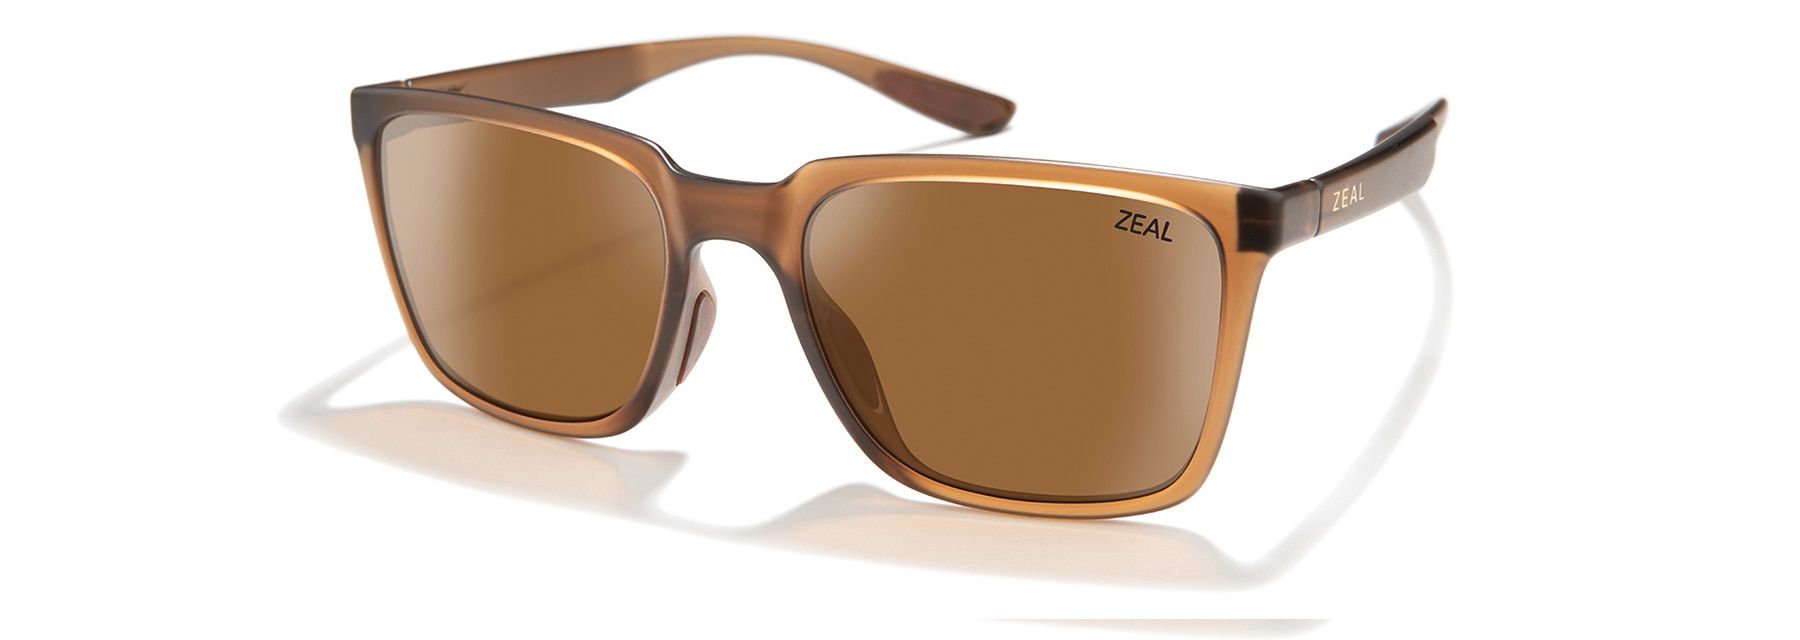 Shop CAMPO (Z1664) Sunglasses by Zeal | Zeal Optics